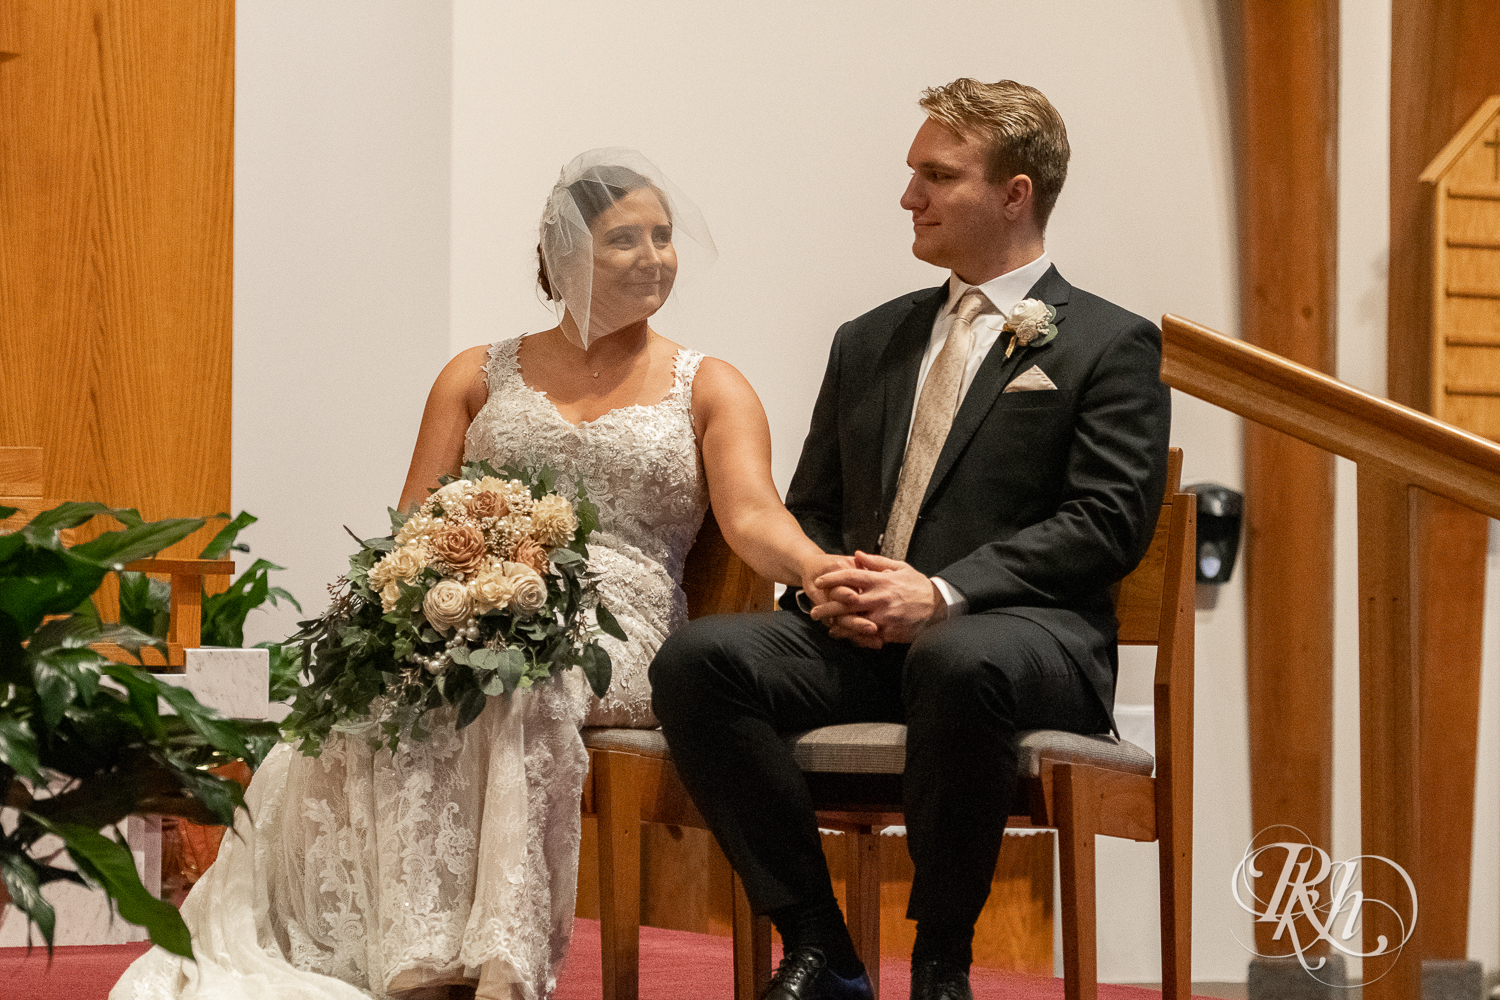 Bride and groom smile at each other at a church wedding ceremony in Stillwater, Minnesota.